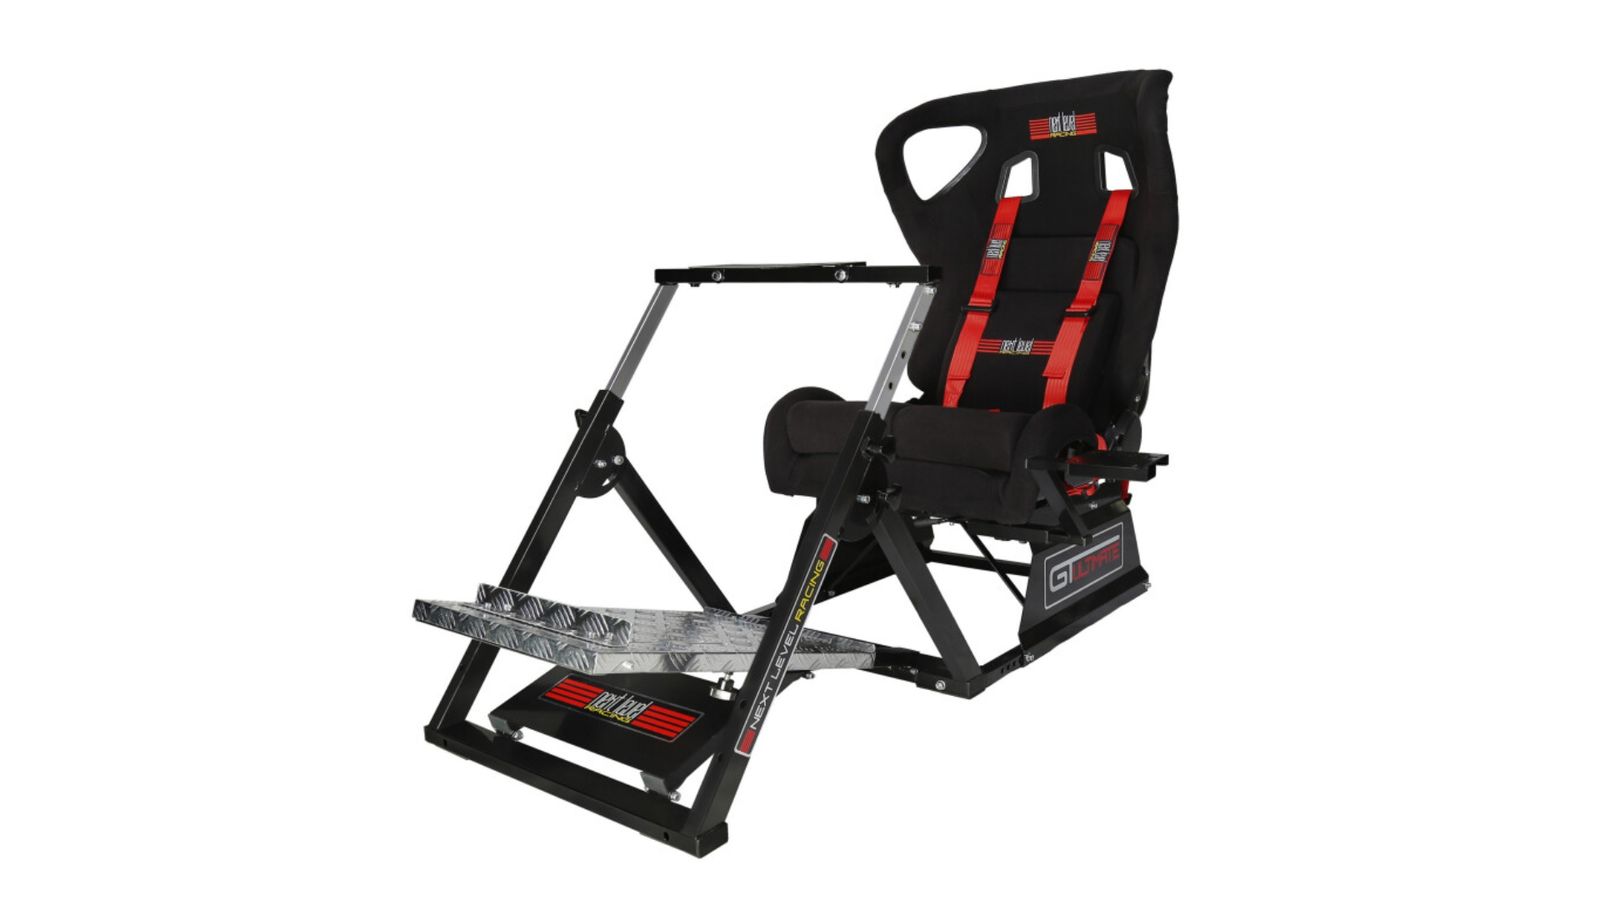 Next Level Racing GT Ultimate V2 product image of a black racing chair with wheel and pedal stand featuring a red racing seatbelt.